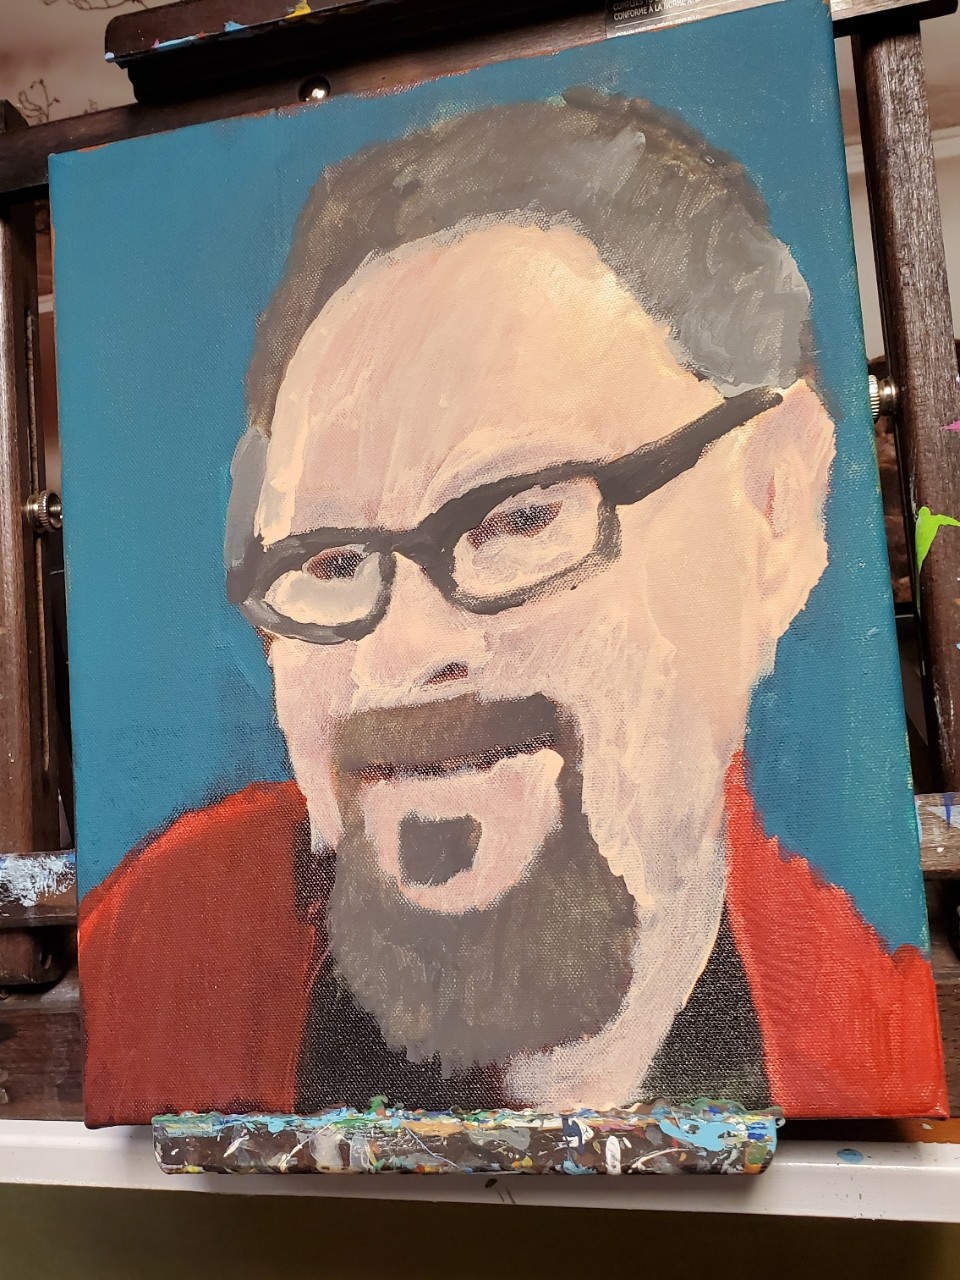 photo of a painting in a studio. The painting is of an unidentified man with brown hair and a brown goatee, glasses and a red shirt, against a blue background.